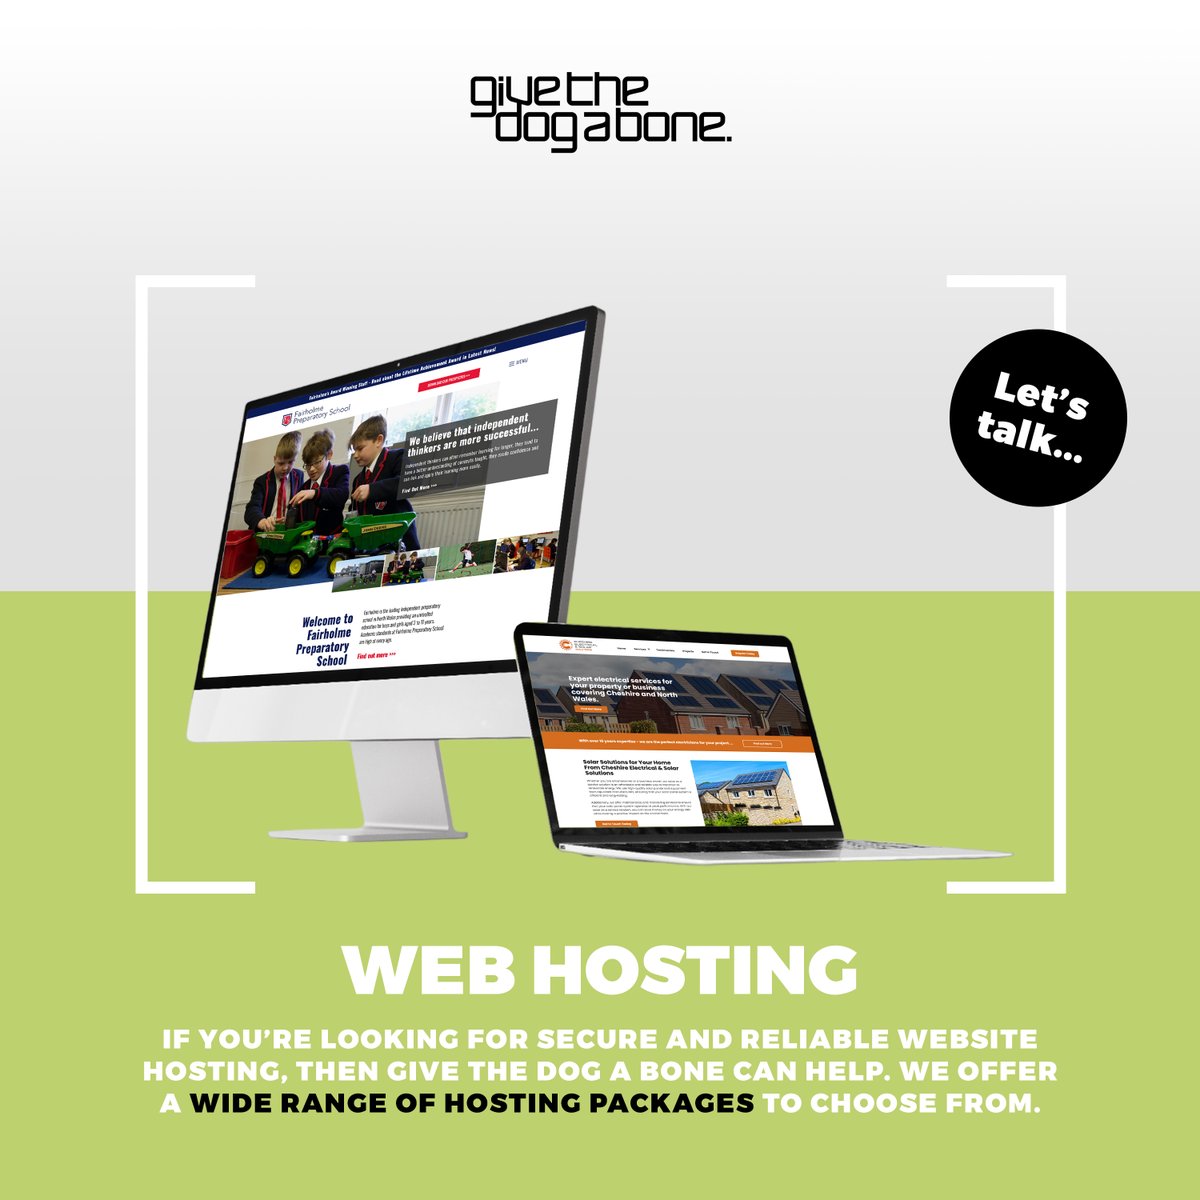 If you’re looking for secure and reliable website hosting, then Give the Dog a Bone can help. Depending on the size of your website, there’s a wide range of hosting packages to choose from.